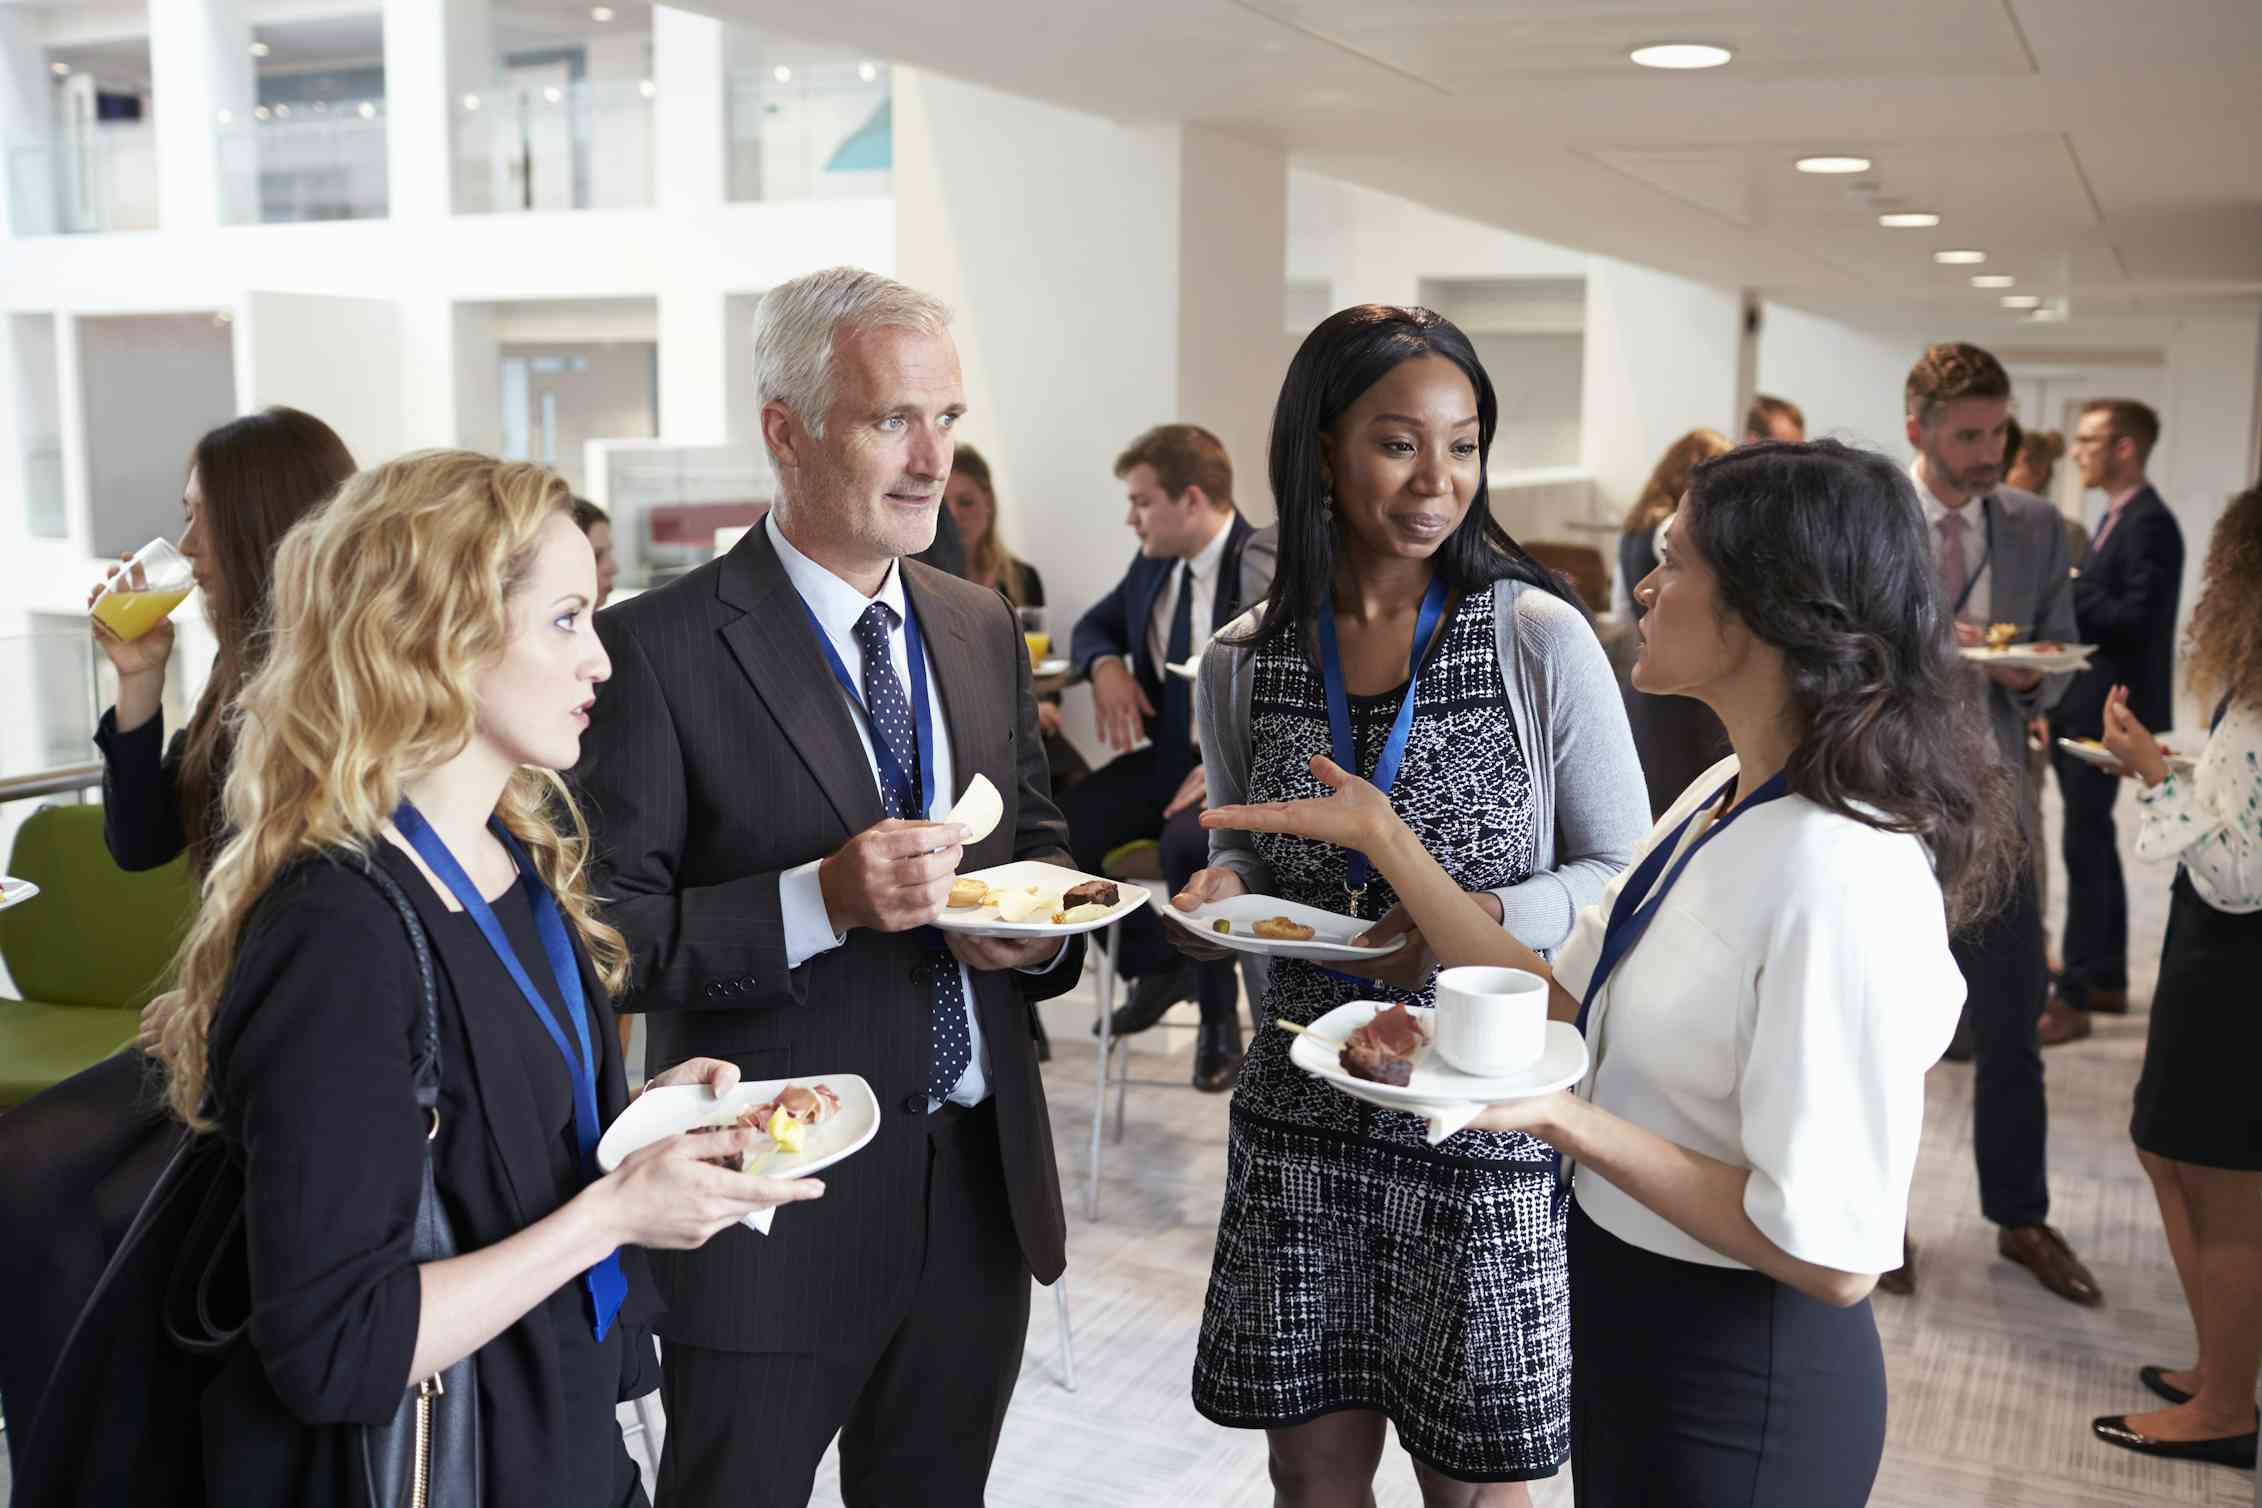  A group of people networking at a corporate event, some holding plates with food and drinks.